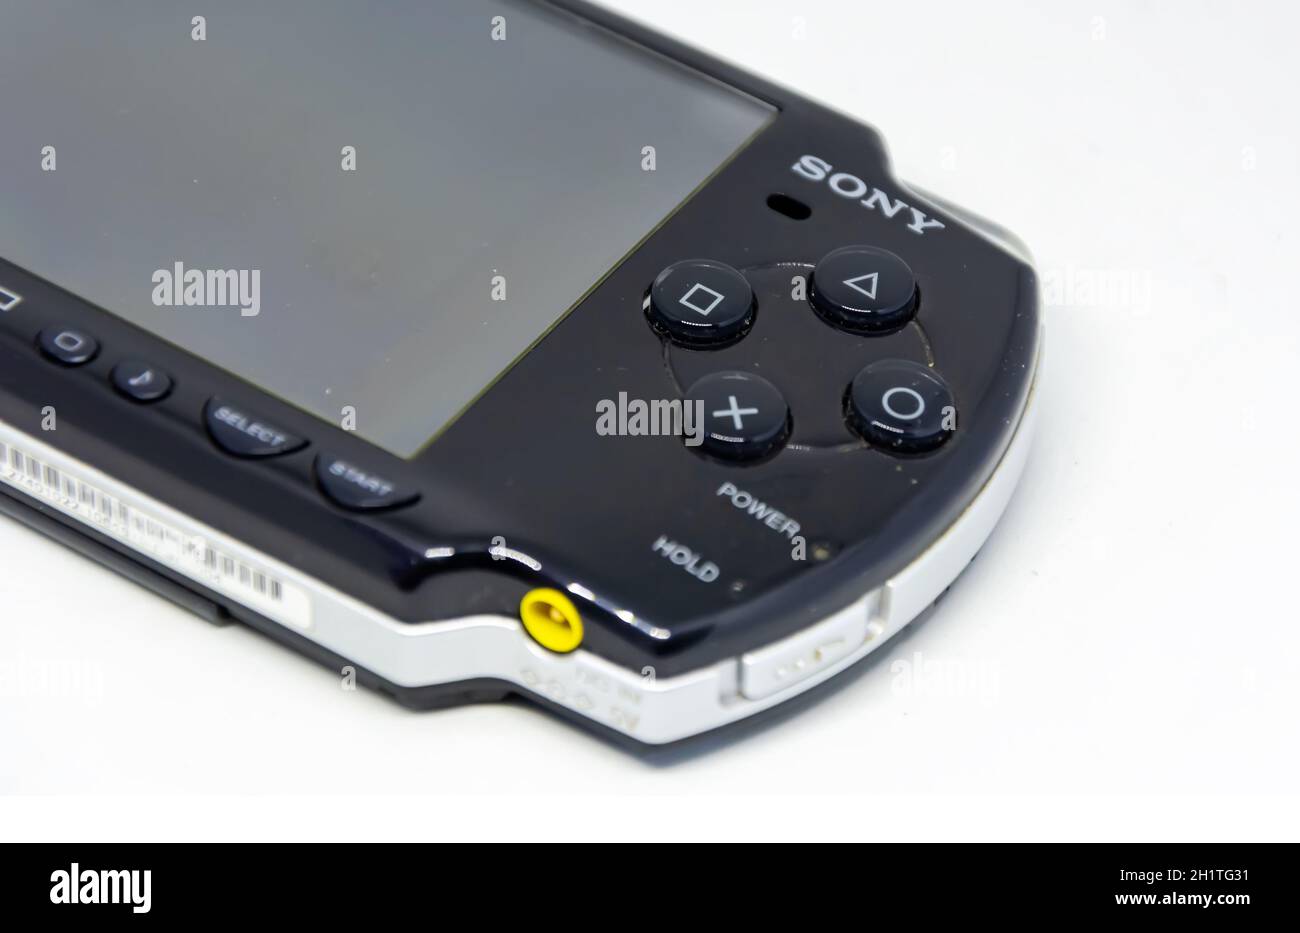 Playstation Portable High Resolution Stock Photography and Images - Alamy